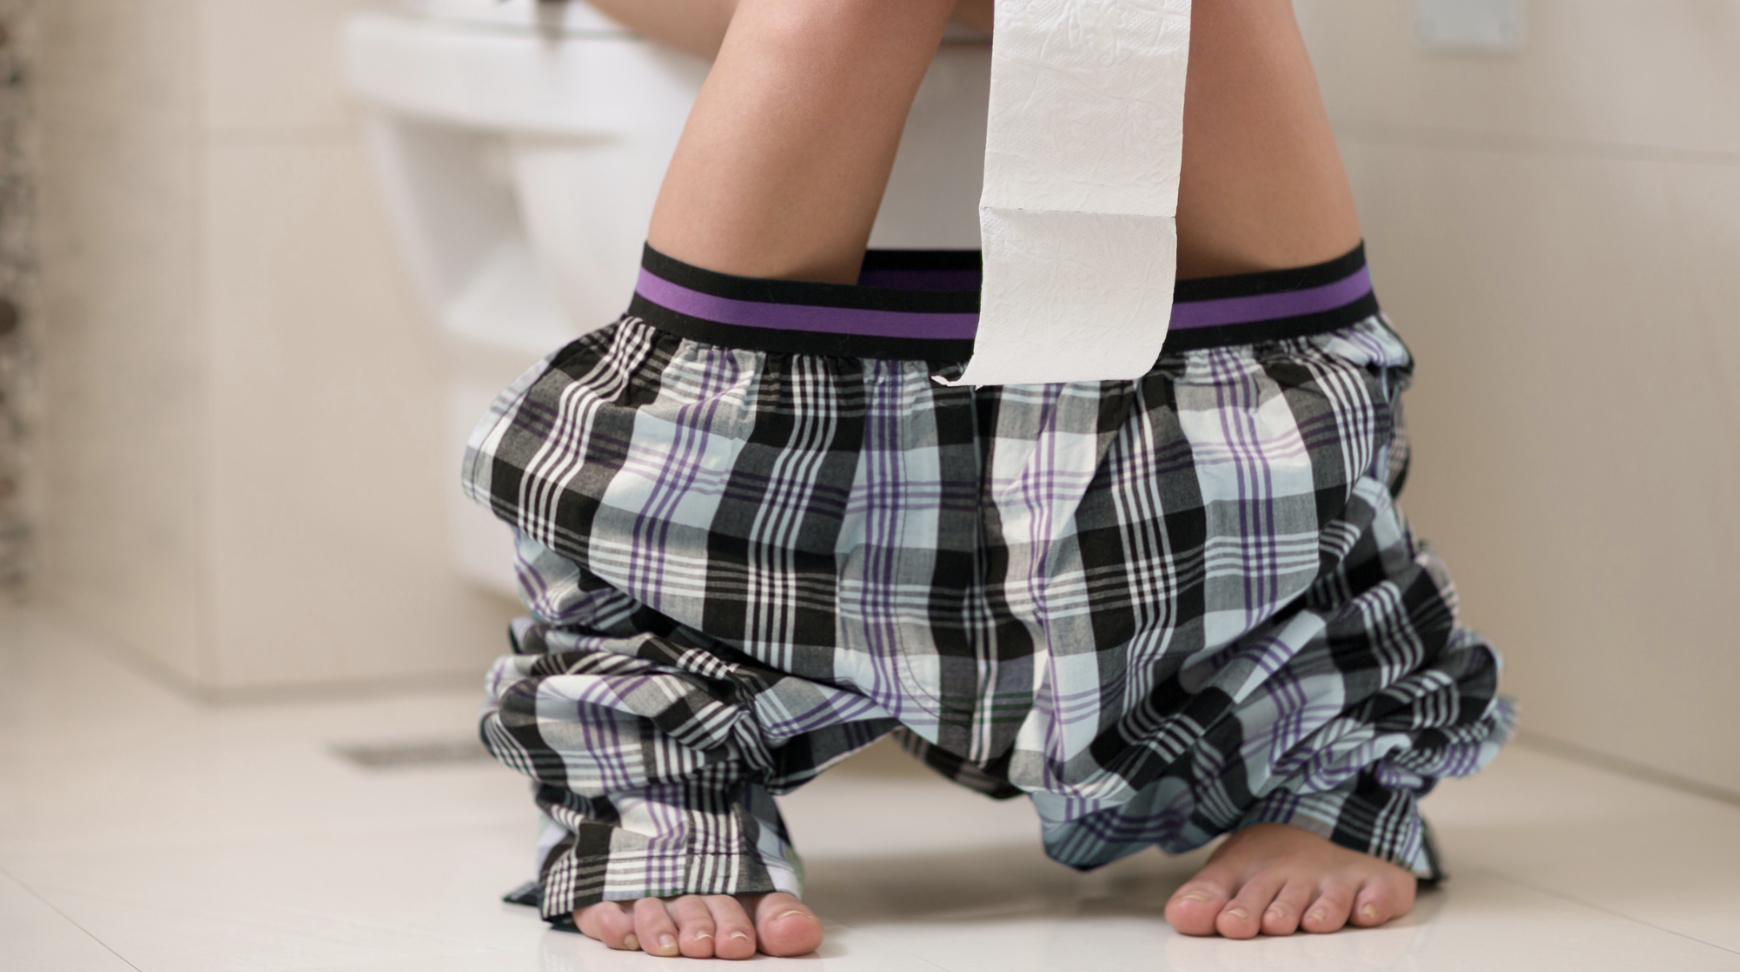 Are You Pushing Out Your Pee? 5 Tips for Proper Urination (And Why it Matters) pic image